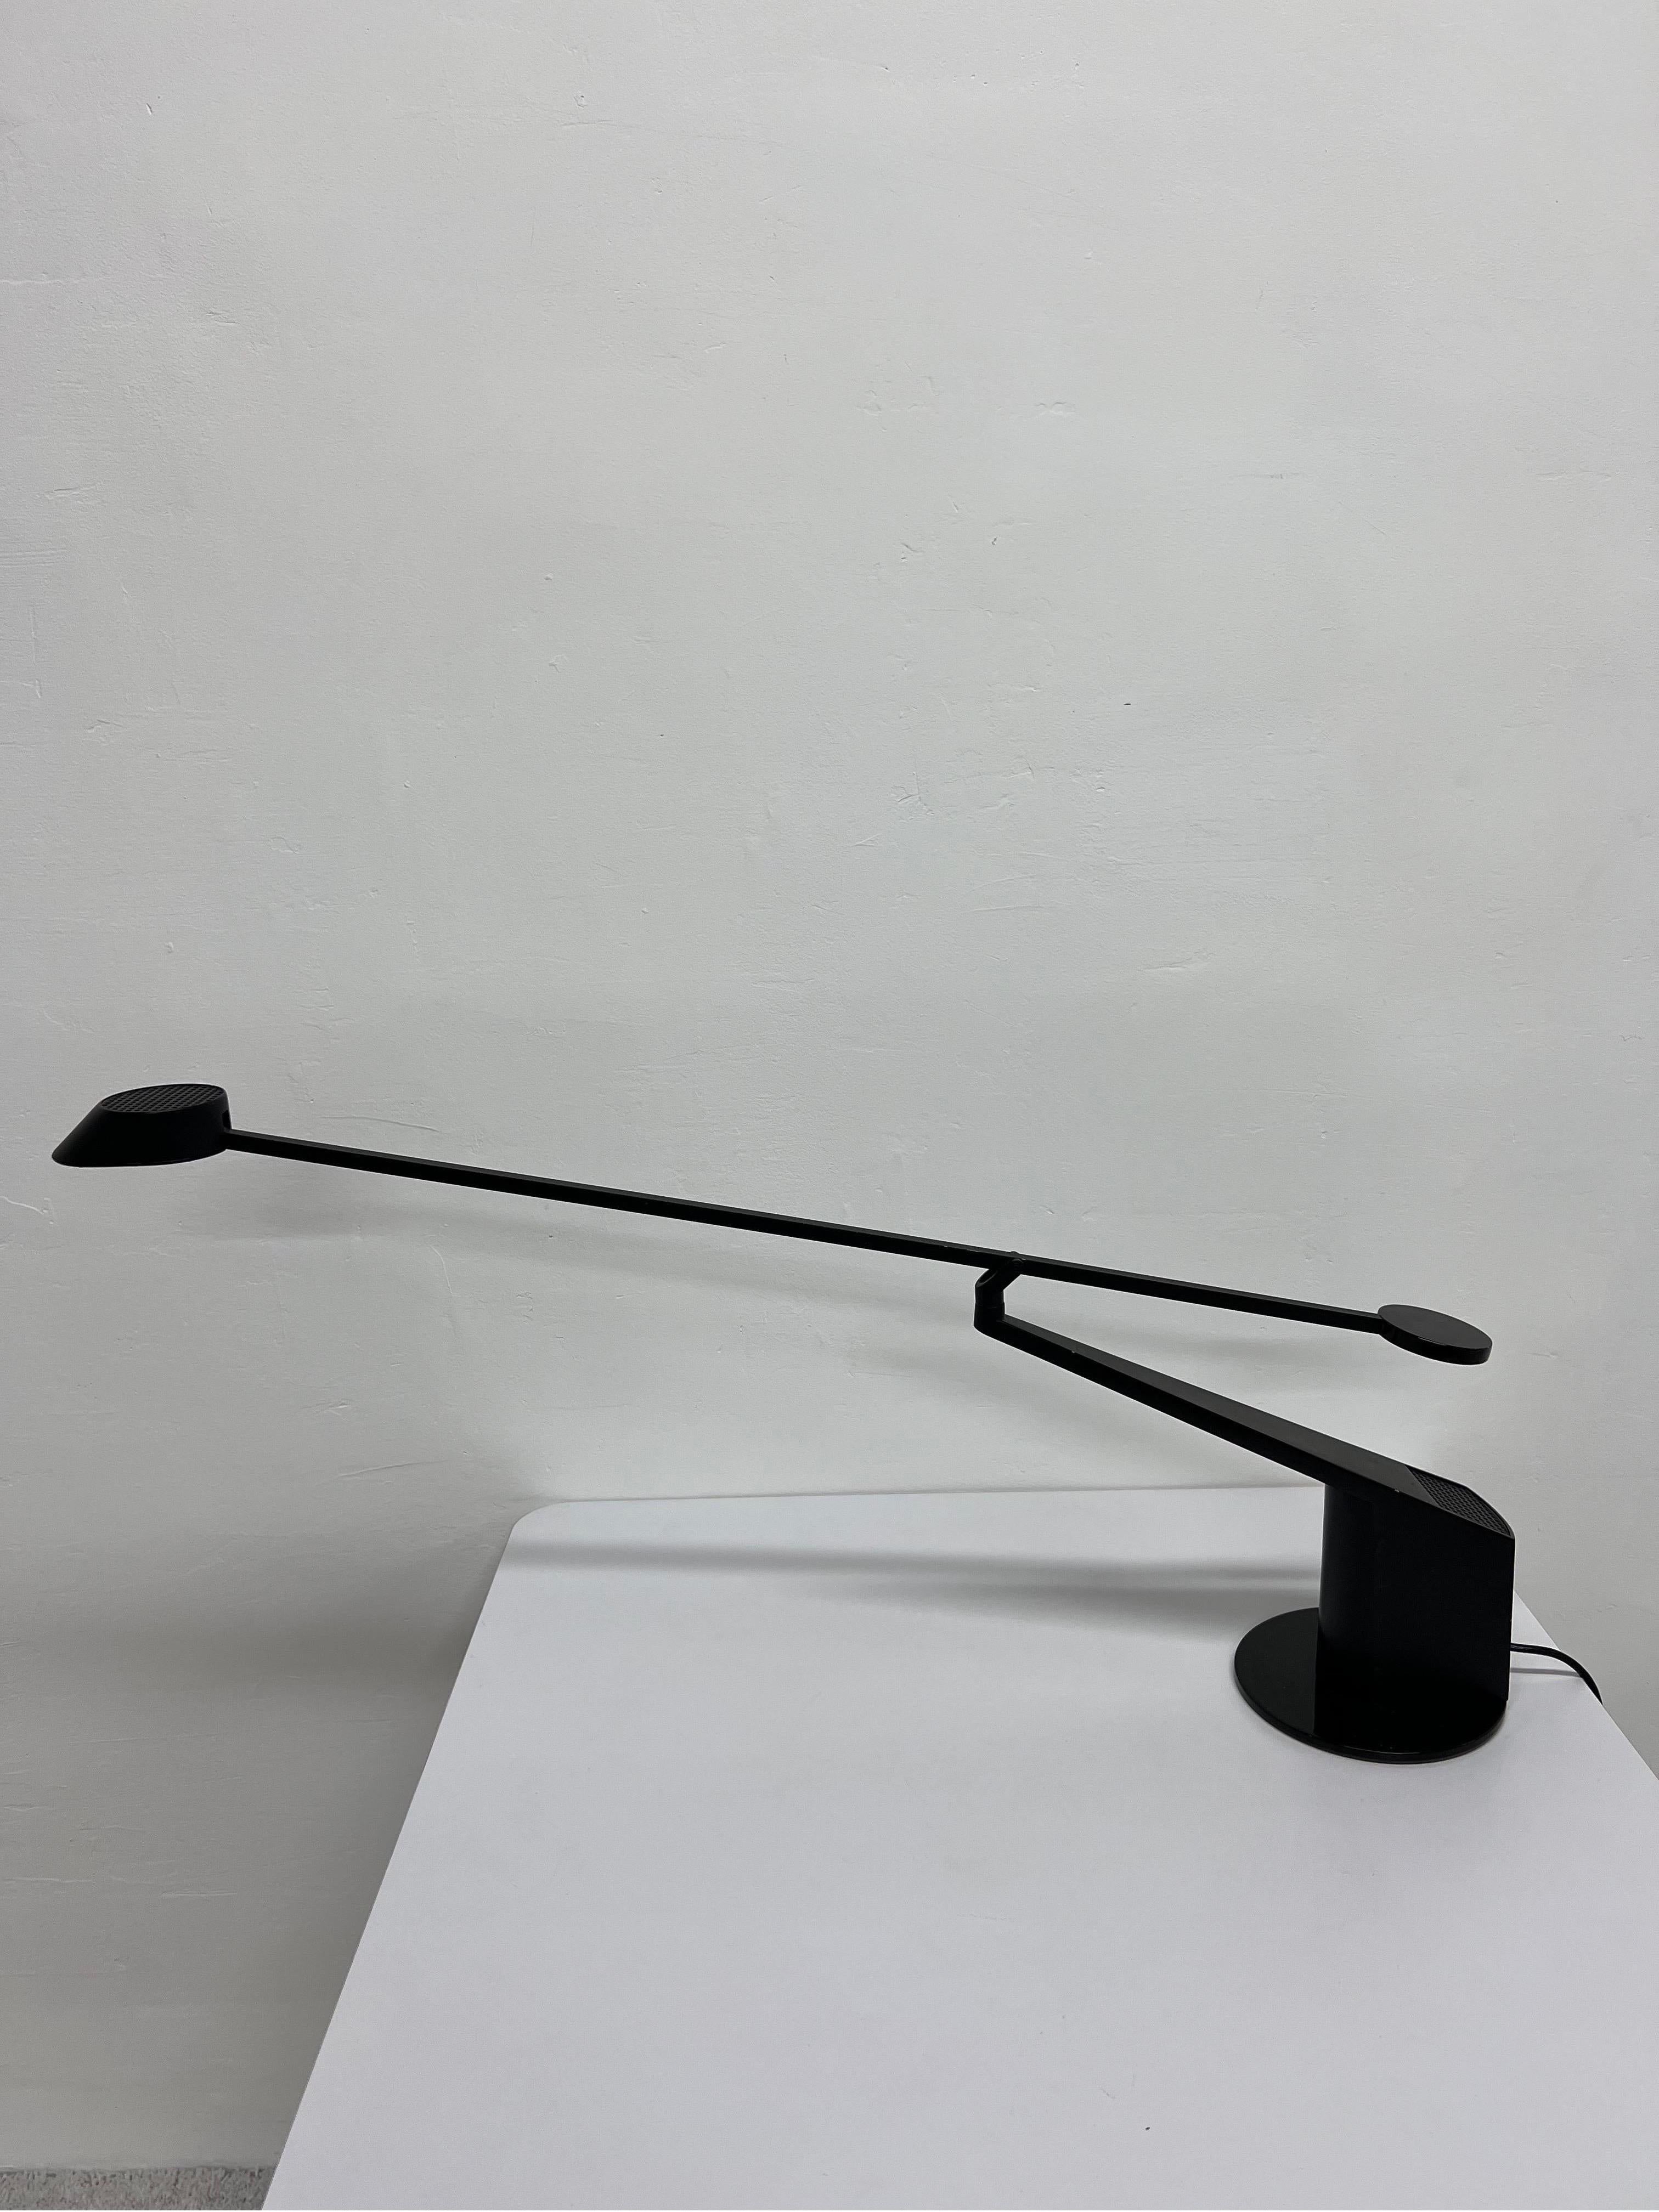 Adjustable black lacquered, aluminum allow table or desk lamp by Rodolfo Bonetto for iGuzzini, Italy, 1980s.